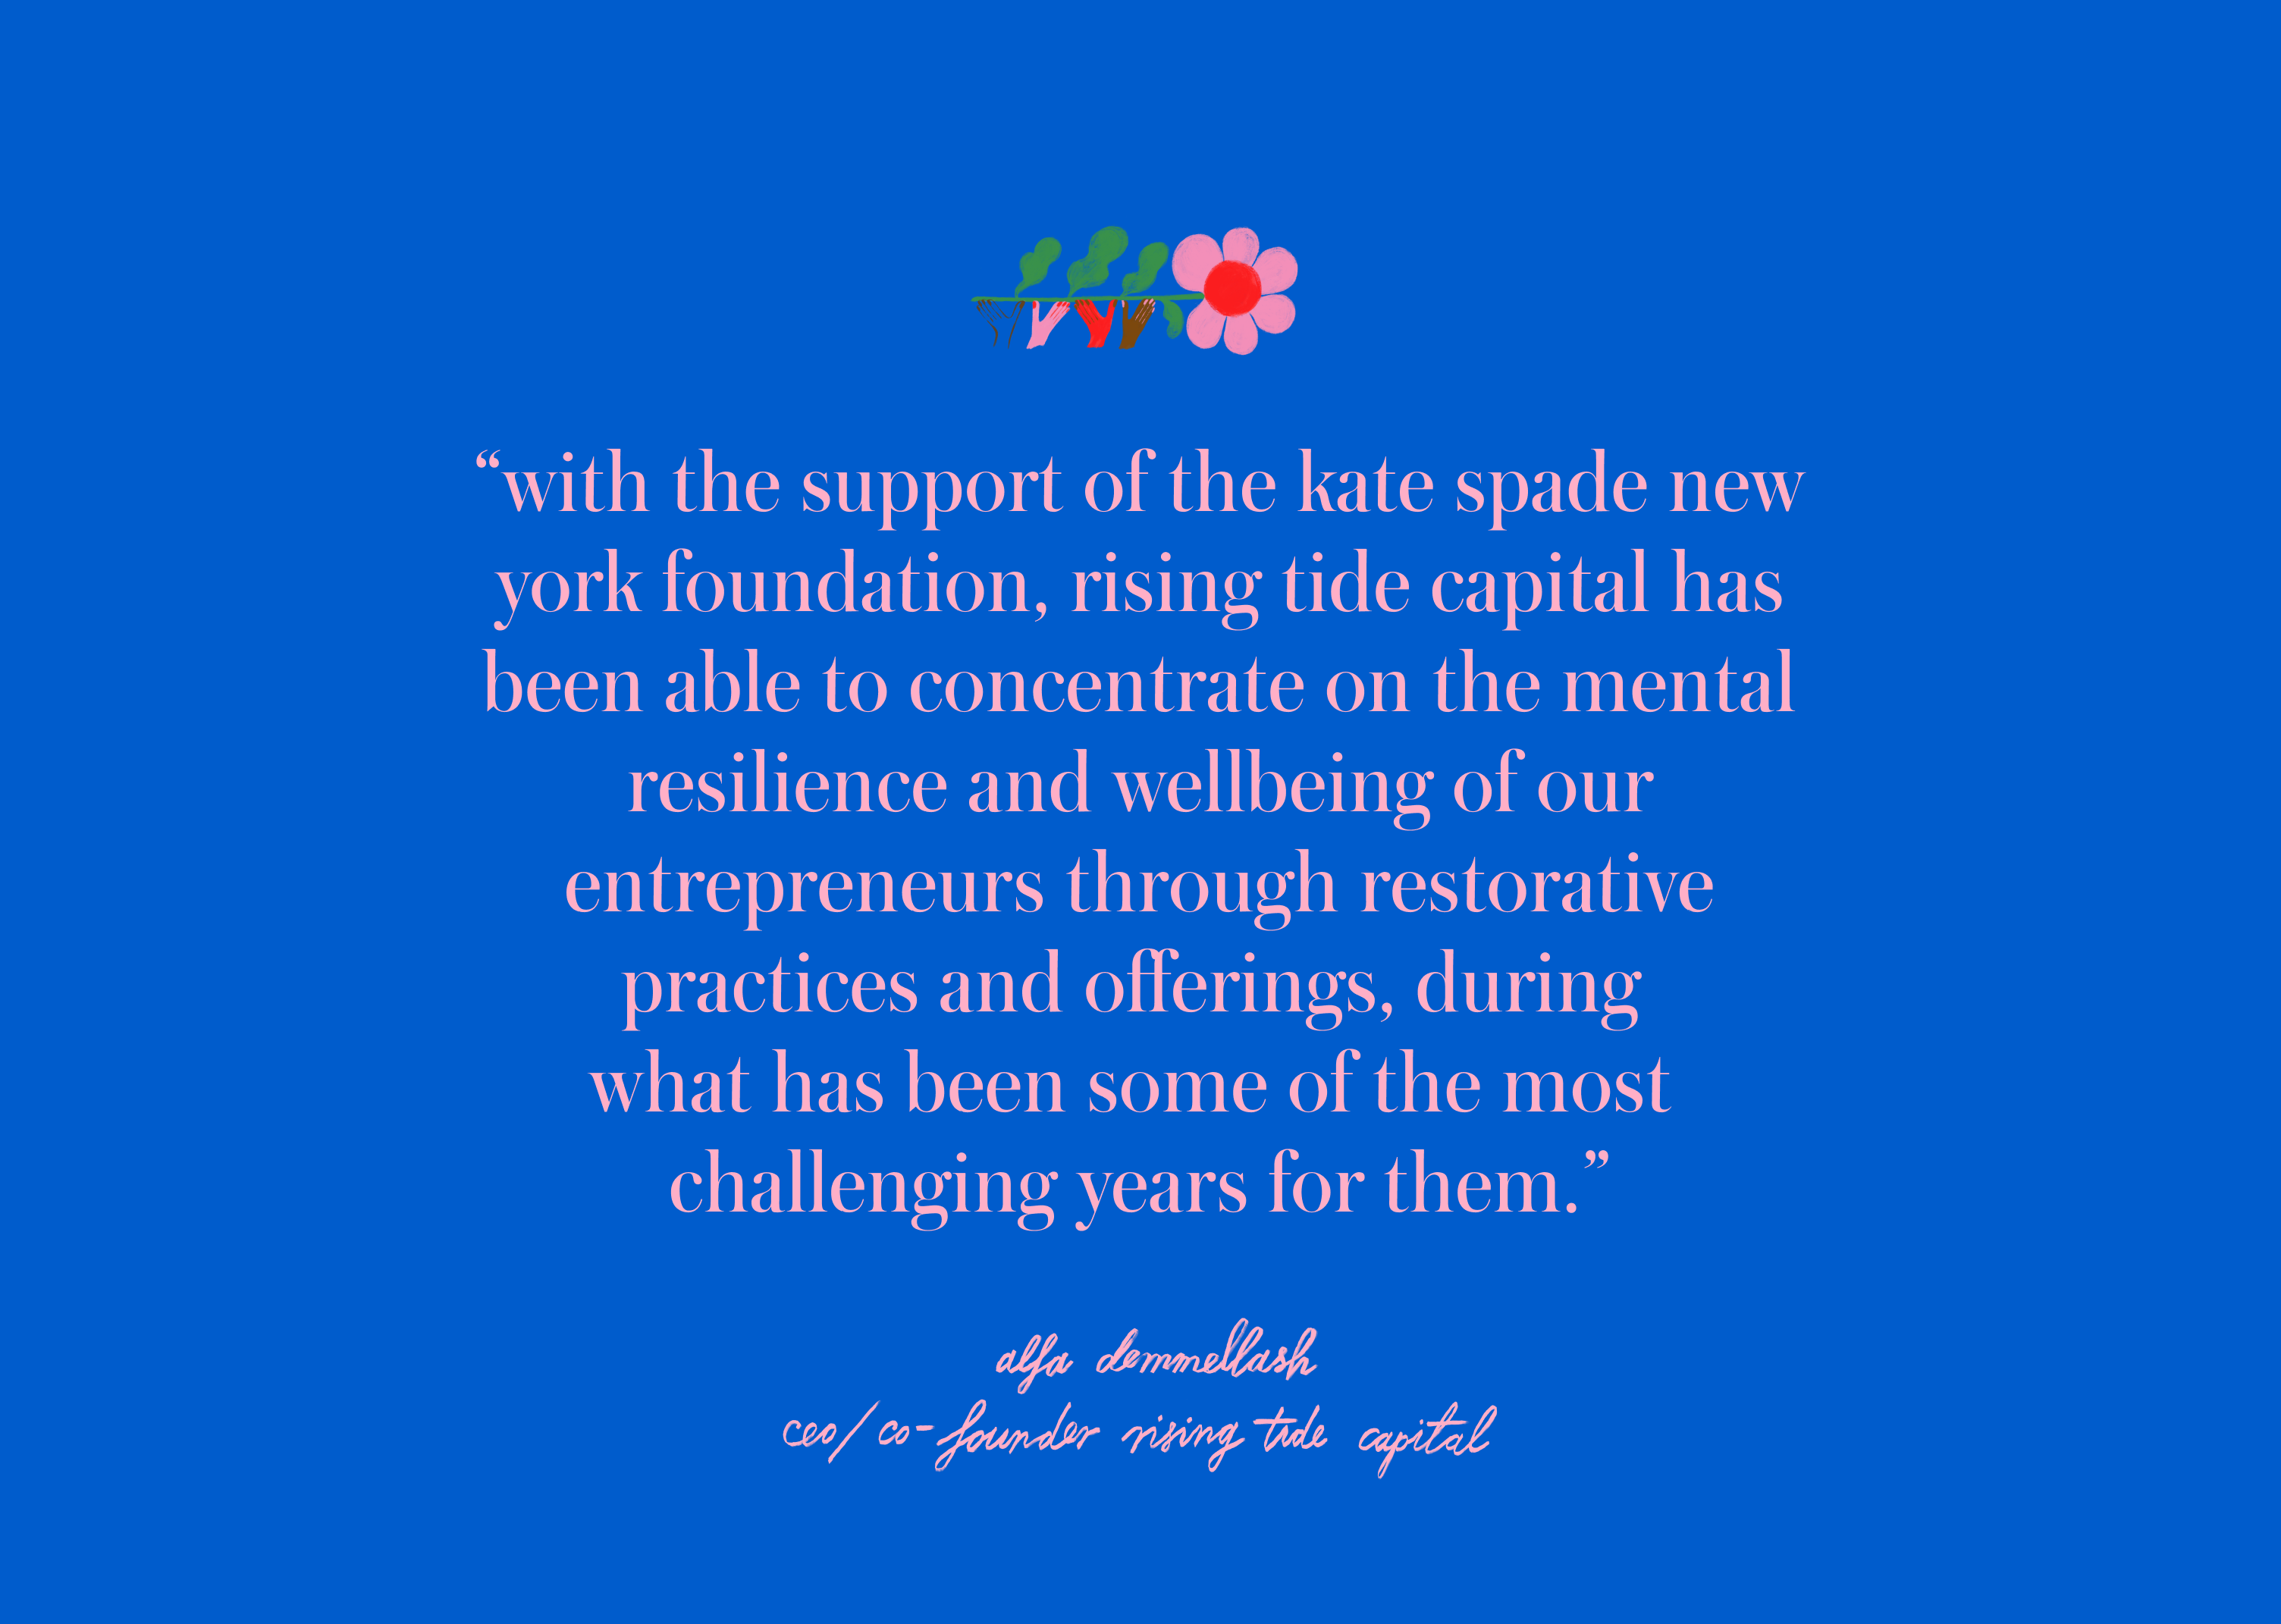 with the support of the kate spade new york foundation, Rising Tide
													Capital has been able to
													concentrate on the mental resilience and wellbeing of our entrepreneurs
													through restorative
													practices and offerings, during what has been some of the most
													challenging years for them.